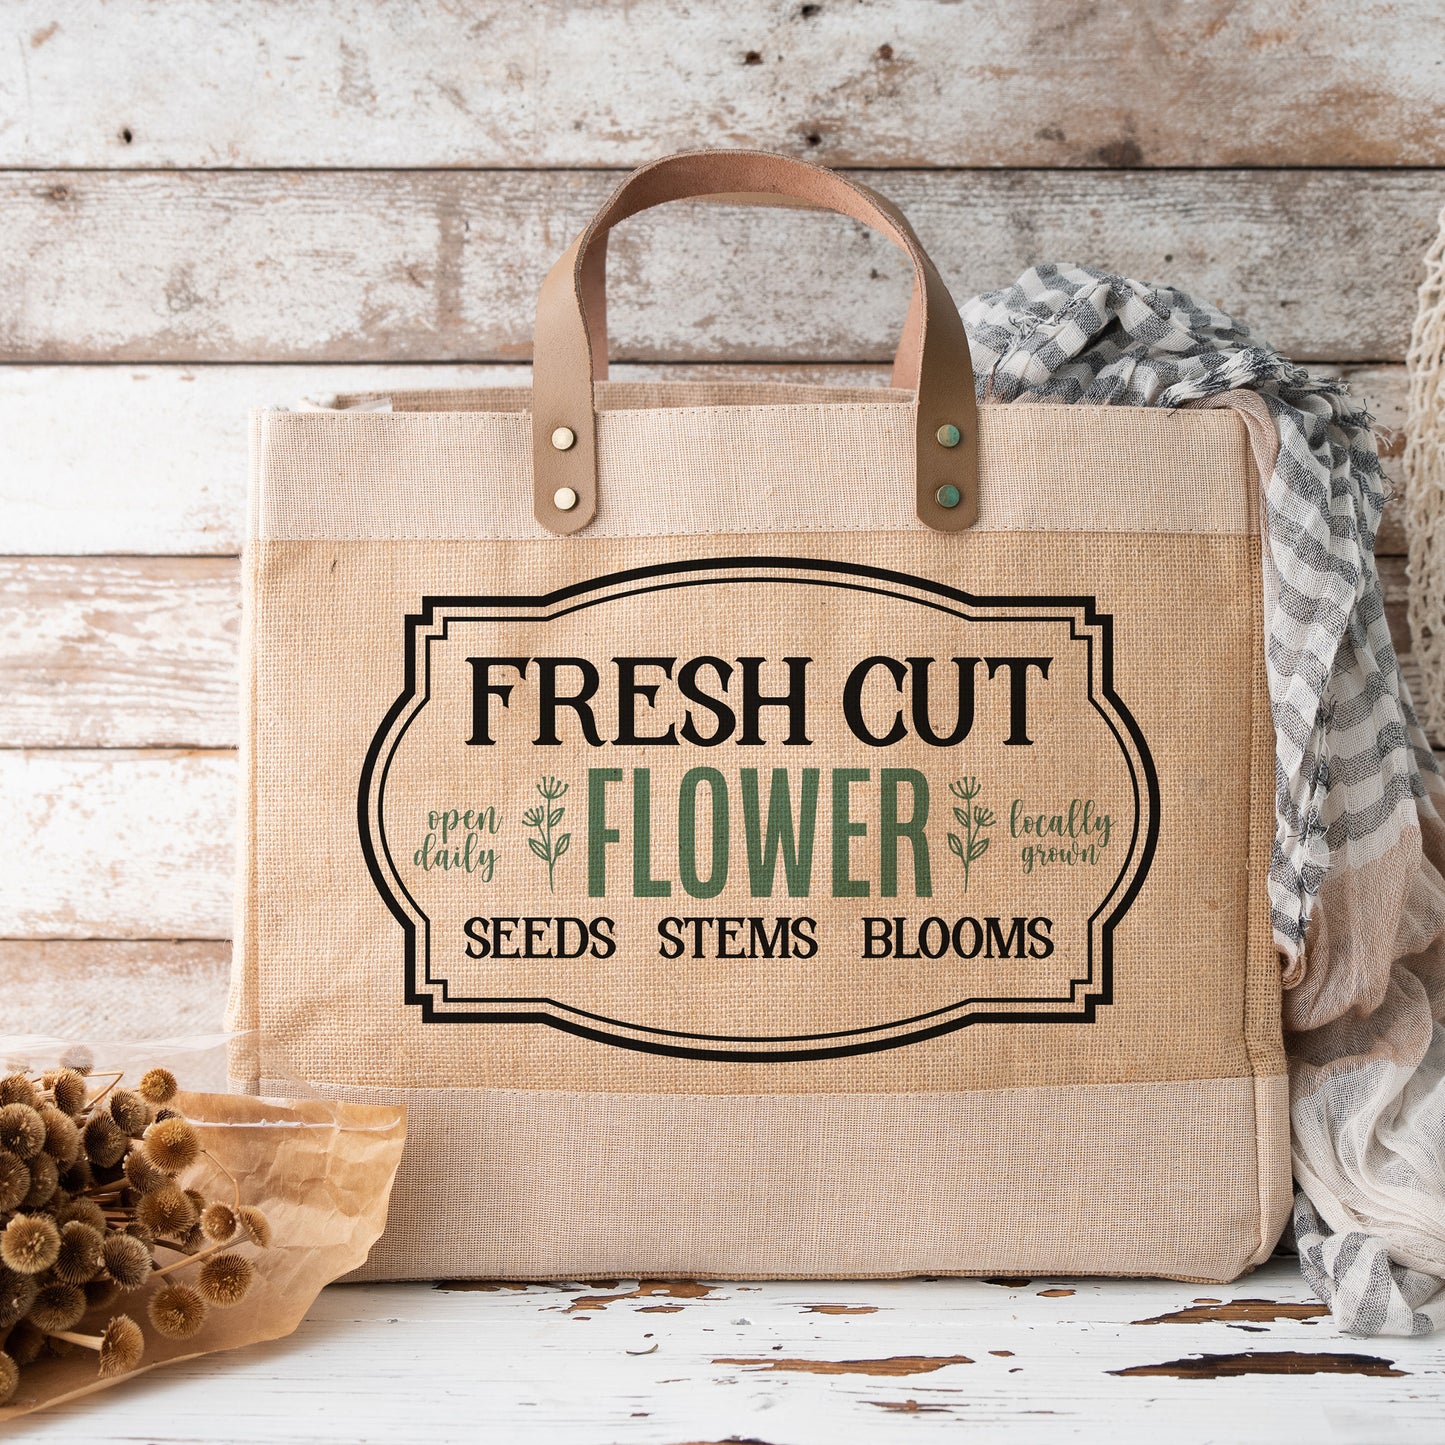 "Fresh Cut Flower Seeds Stems Blooms" Graphic